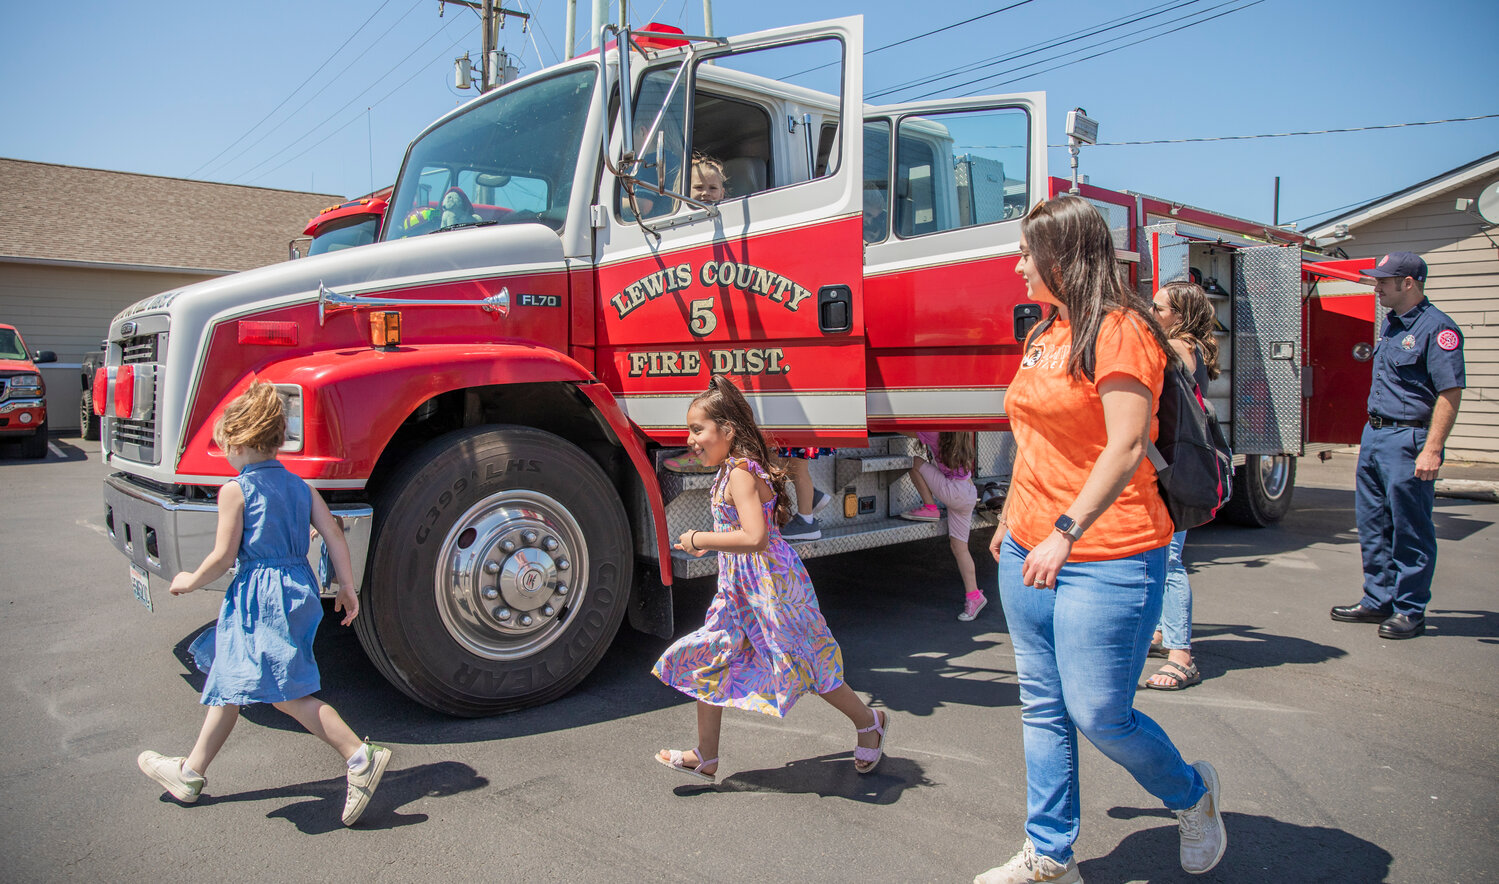 Kindergarten students run around and climb in a fire engine during a visit to Lewis County Fire District 5 in Napavine on Tuesday, June 7.